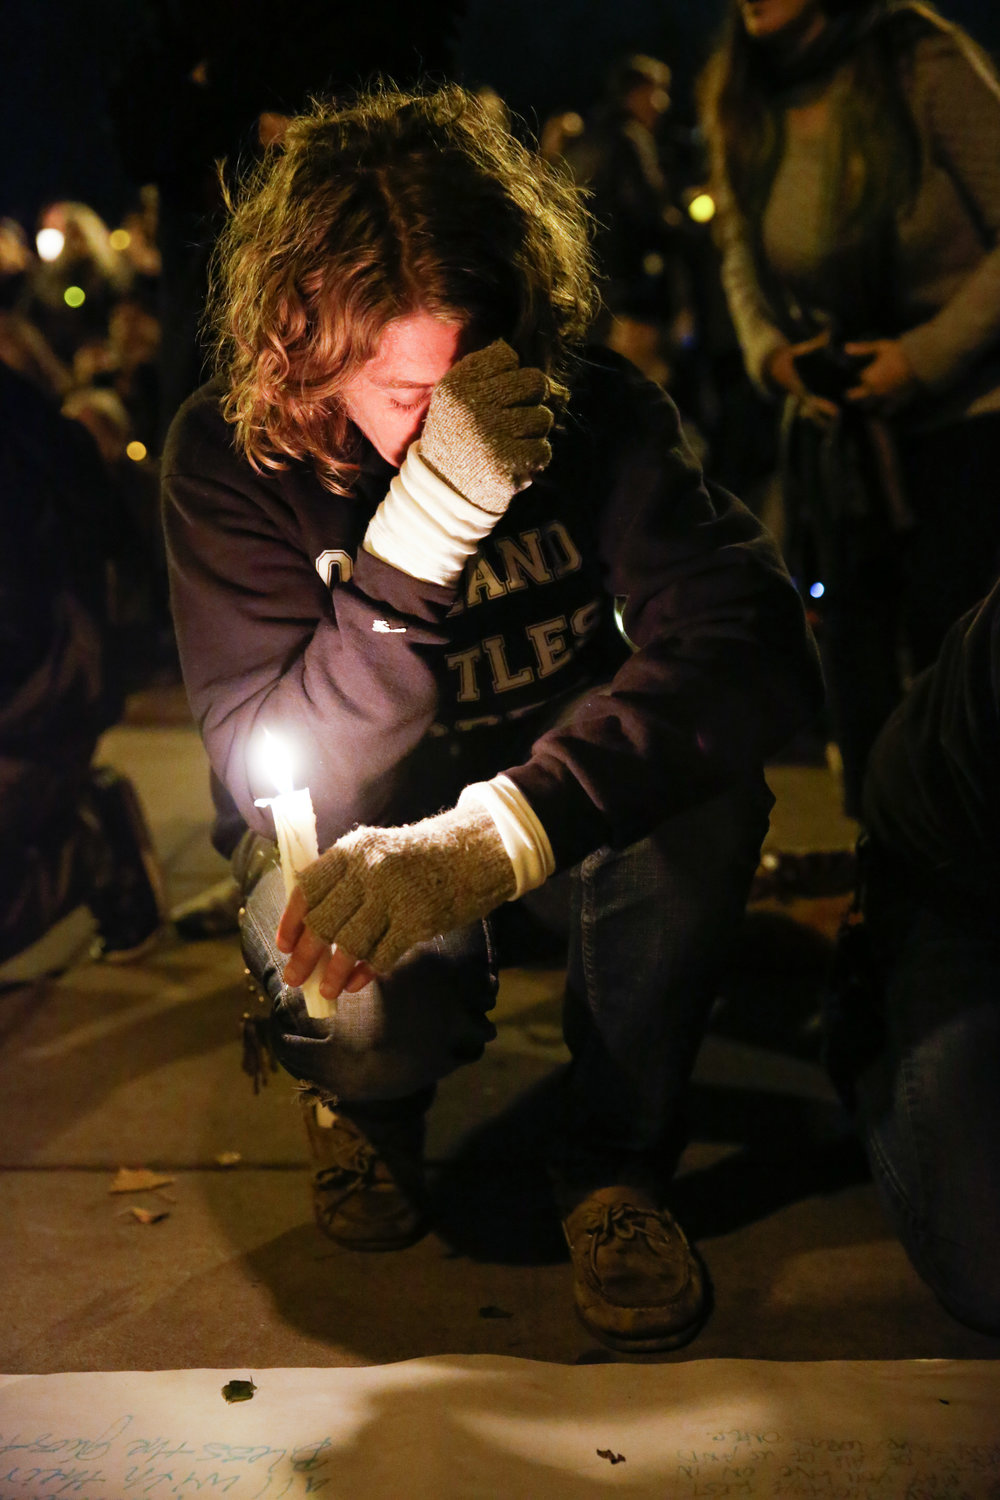  A women holds back tears at a vigil for the victims of the fatal warehouse fire during a vigil at Lake Merritt Pergola in Oakland, California, U.S. December 5, 2016.&nbsp; 